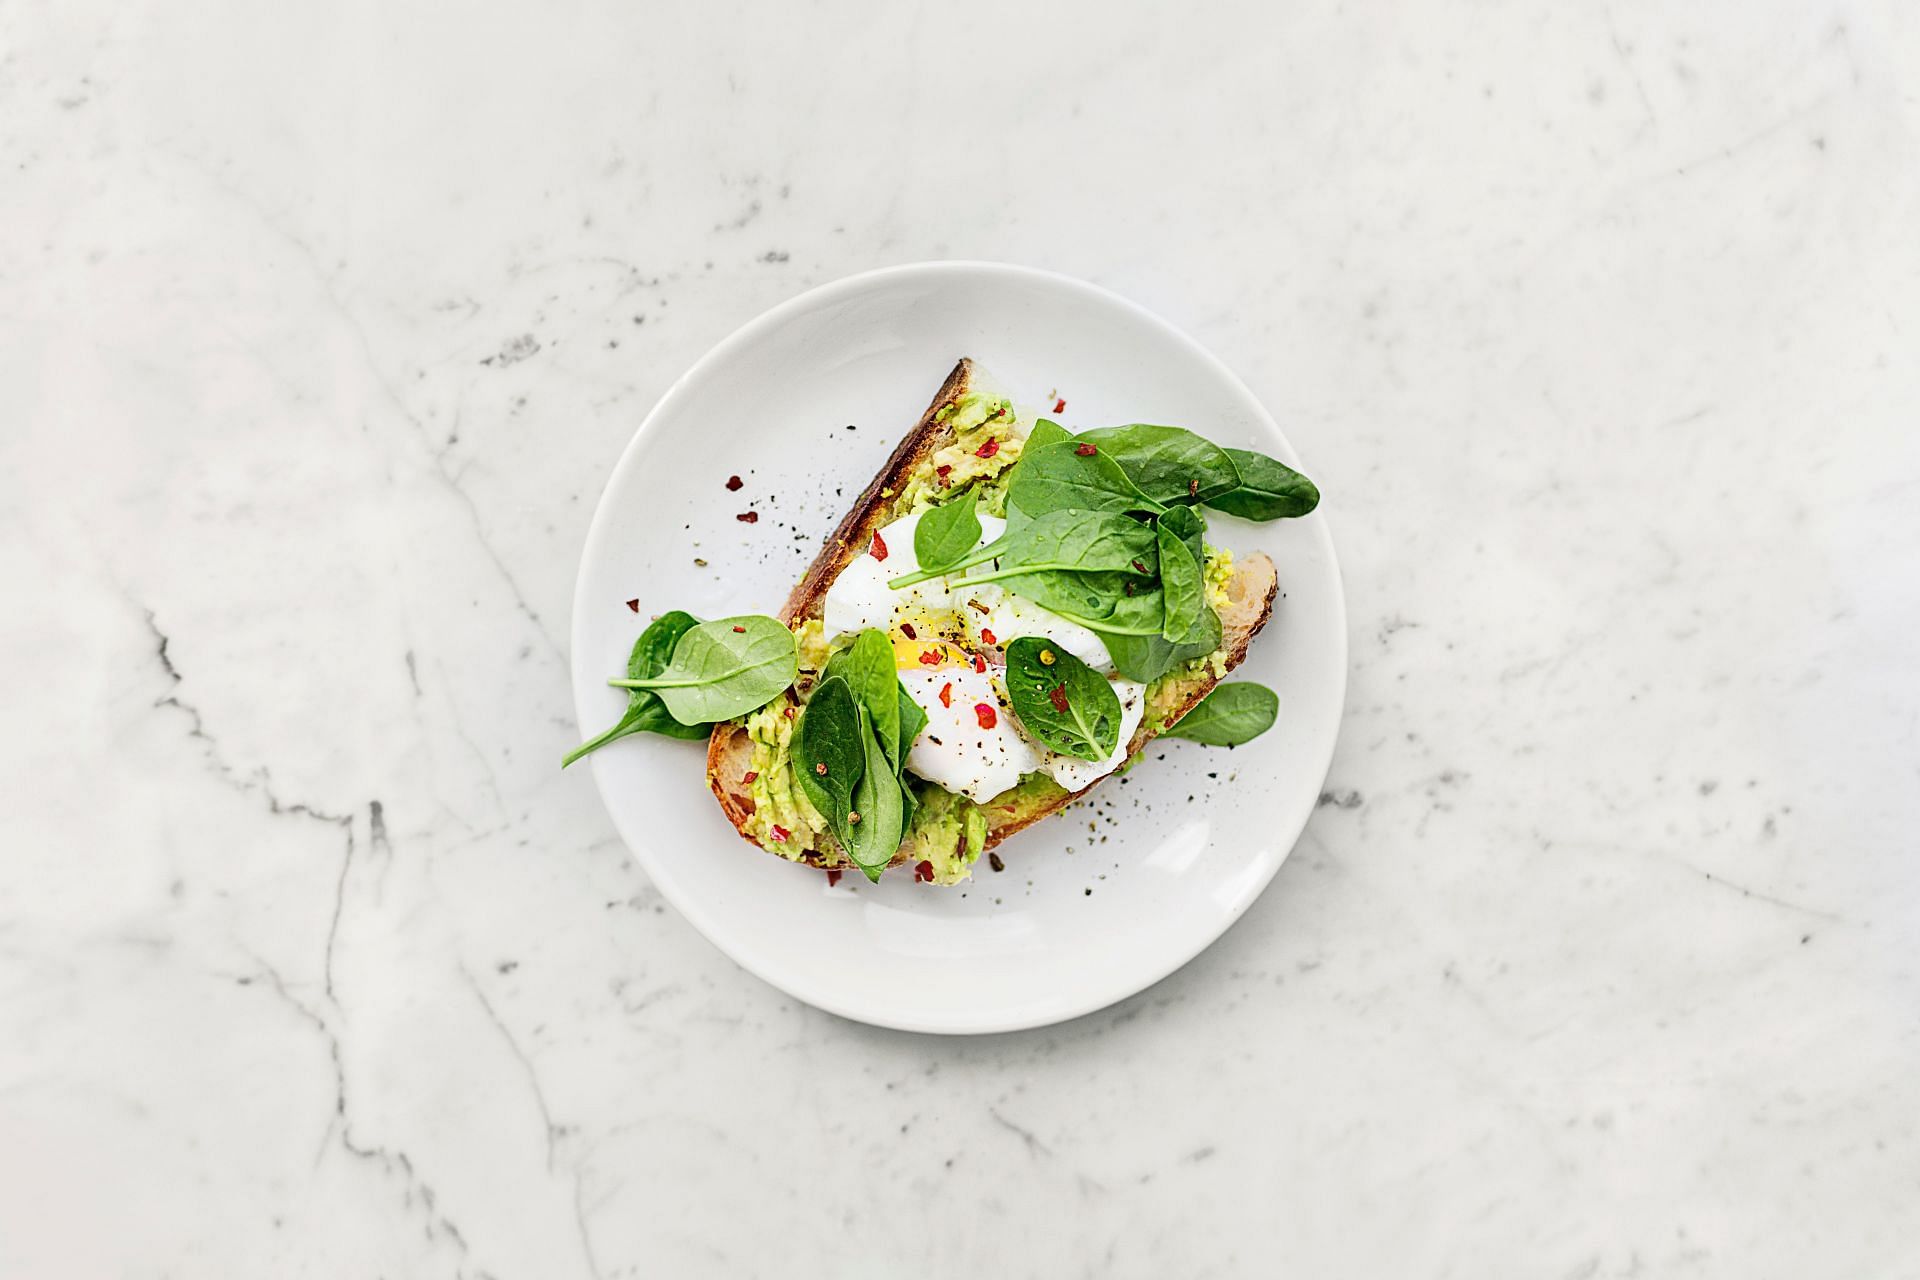 Spinach is your nutrition powerhouse. (Image via Pexels / Daria Shevtsova)